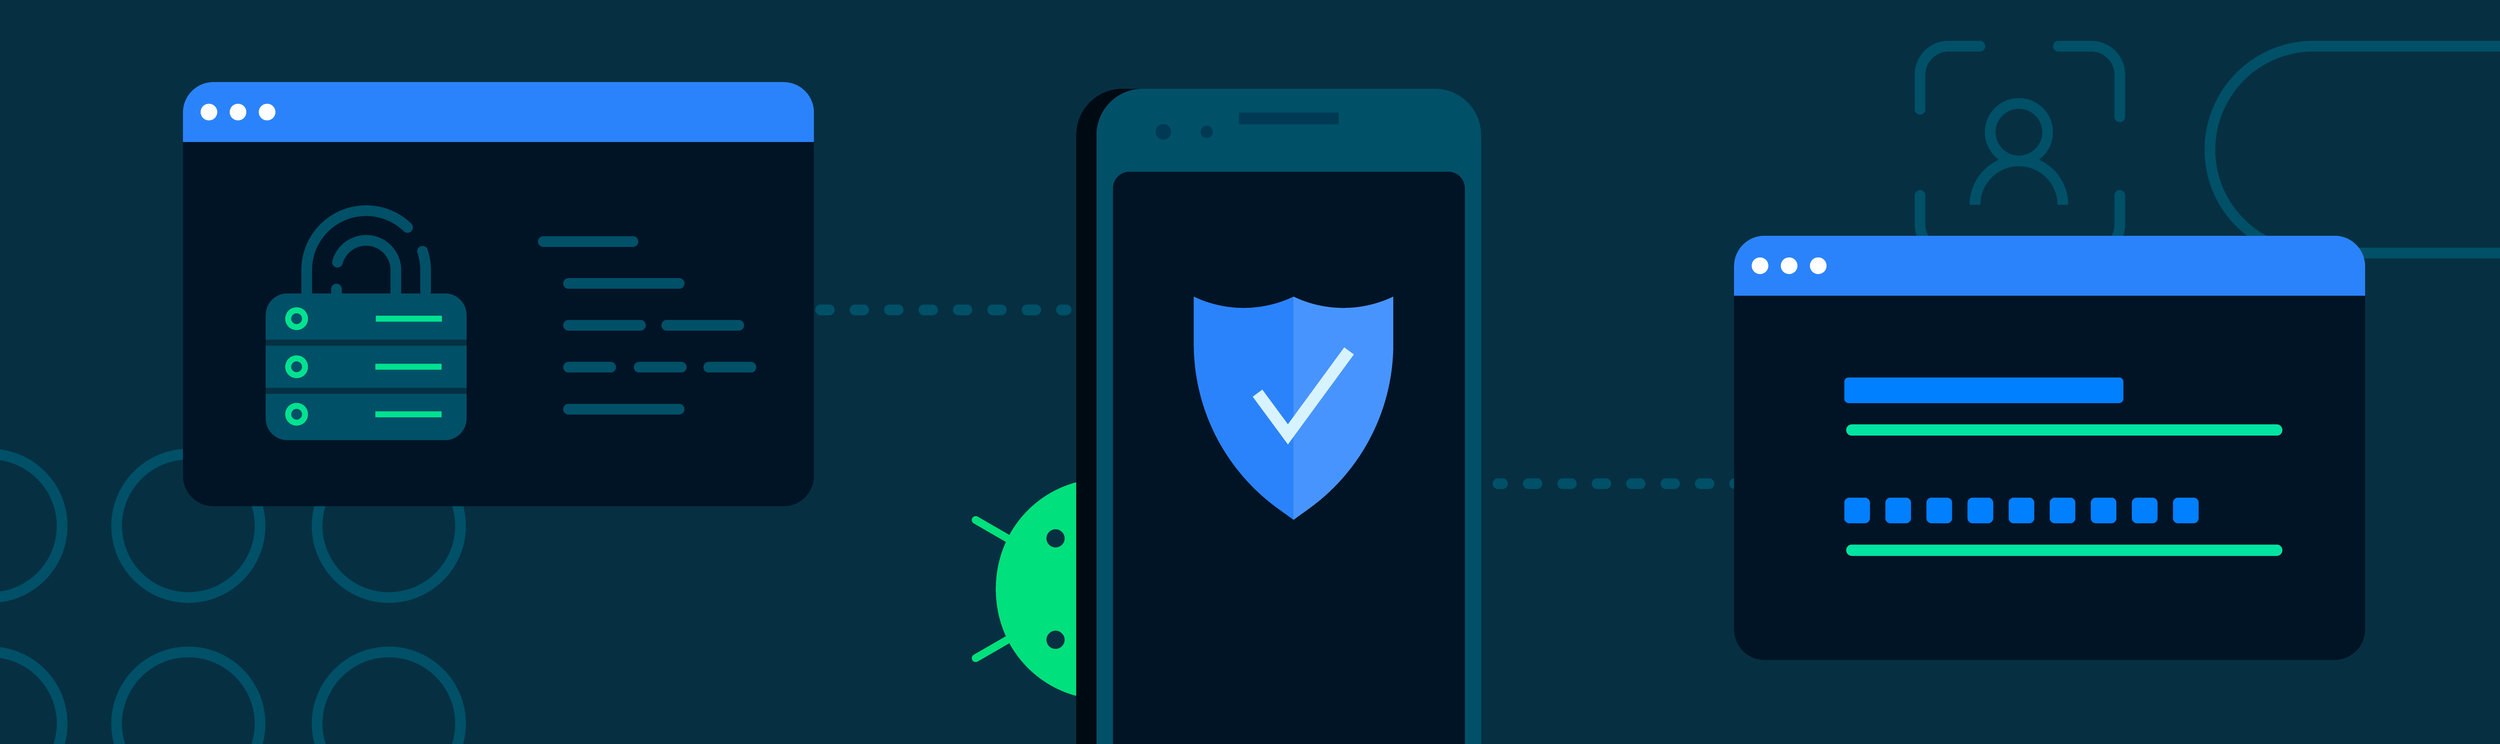 Android-introducing-security-by-design-header-R2.png